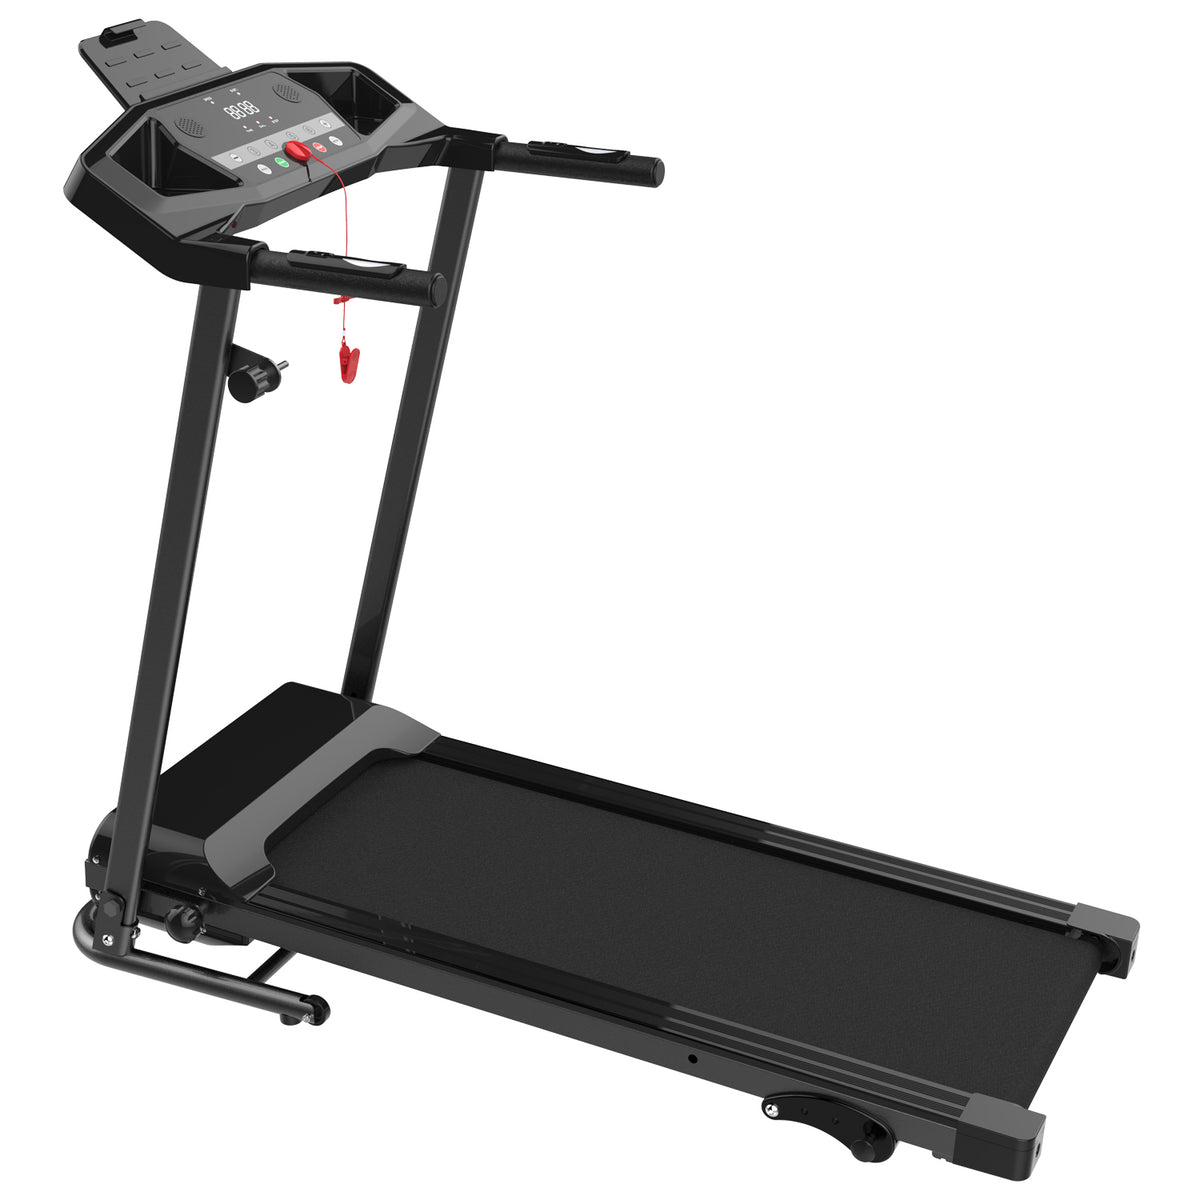 FLIMDER Foldable Treadmills for Home with Incline, 2.5HP Folding Tread